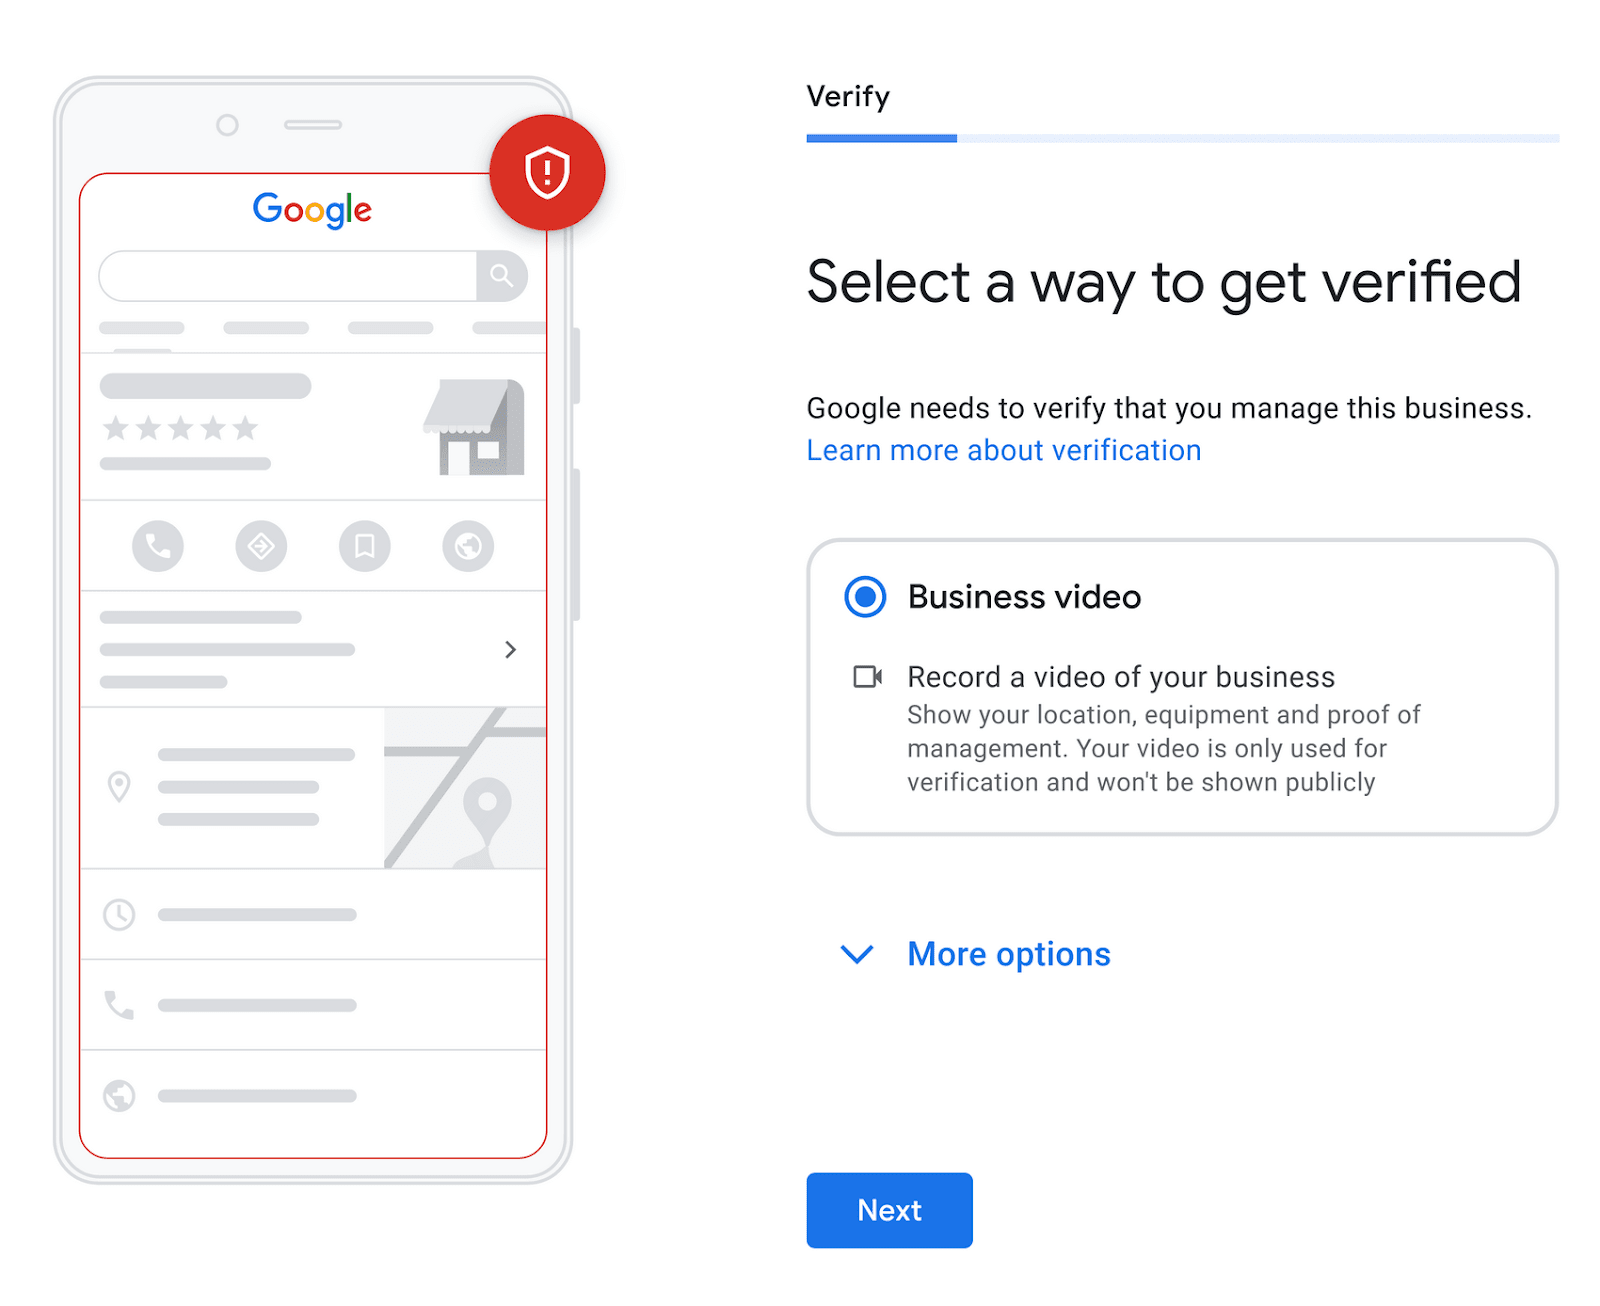 "Select a mode   to get   verified" measurement   of creating a GBP